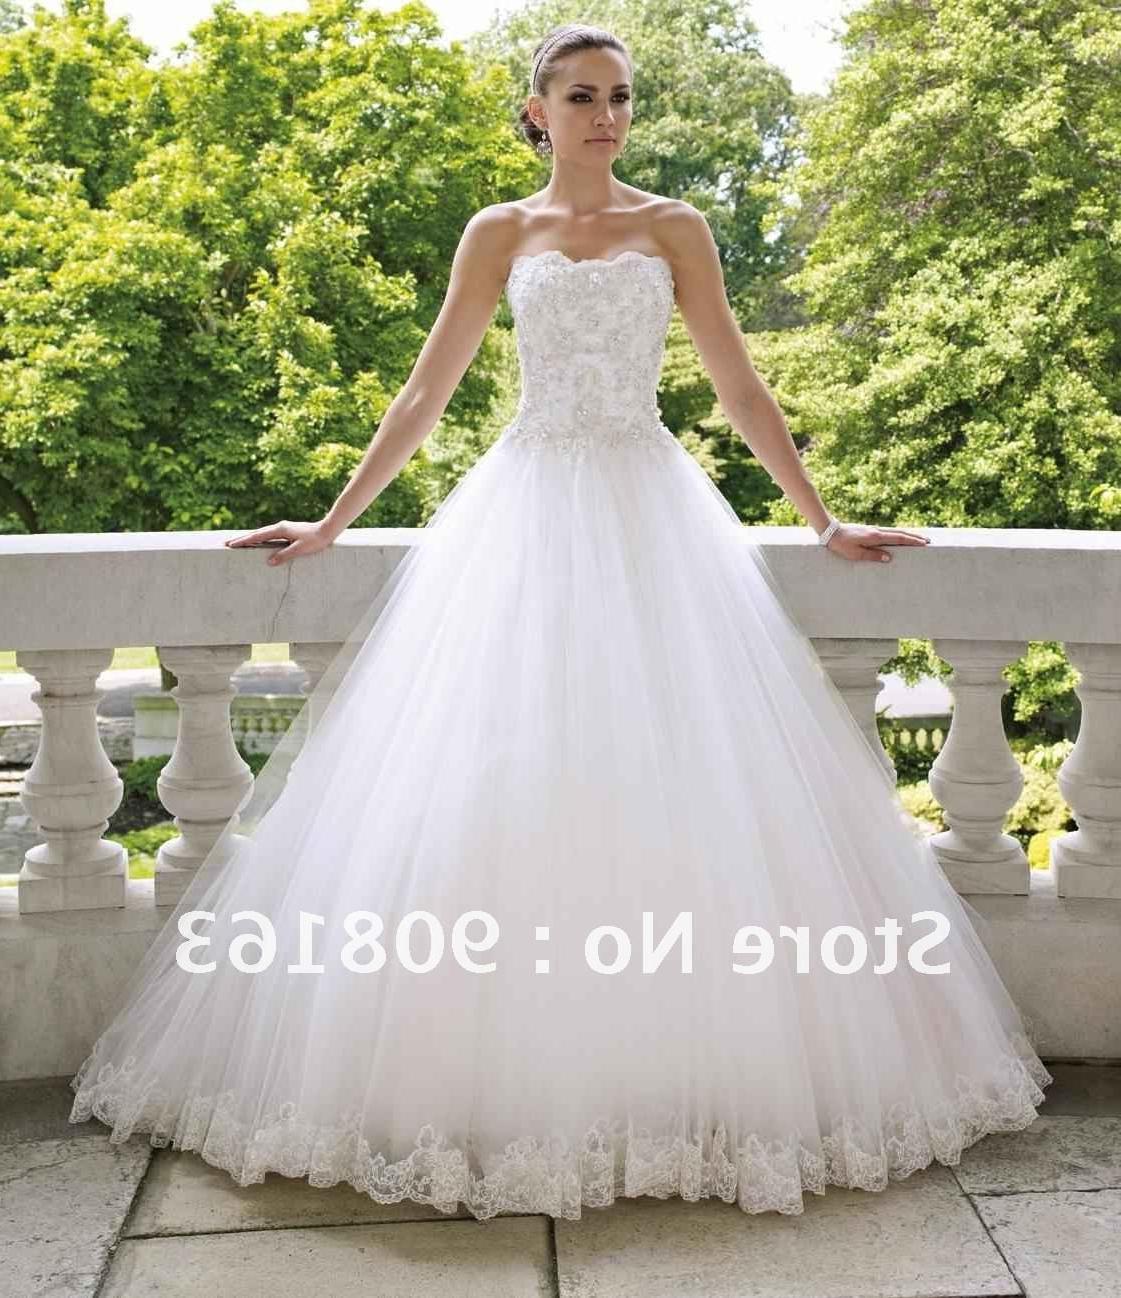 Whole sale Beautiful Ball Gown Lace Top Tull Wedding Dress Designs.